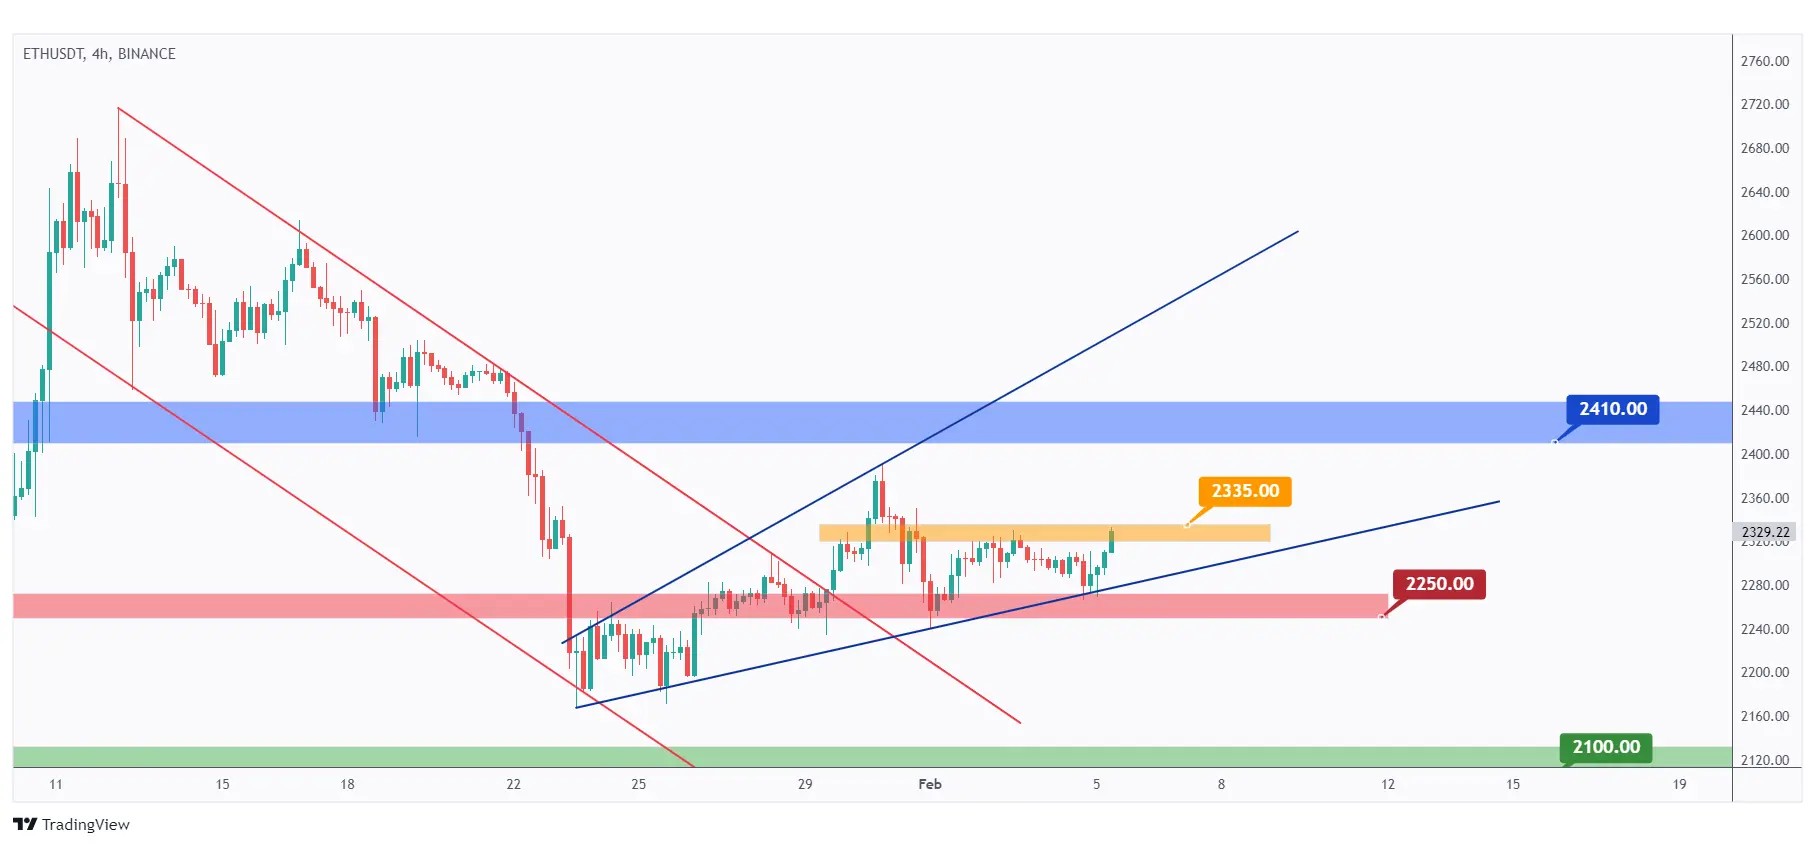 ETH 4h chart overall bullish trading inside a rising wedge pattern and it is currently hovering around the lower bound.